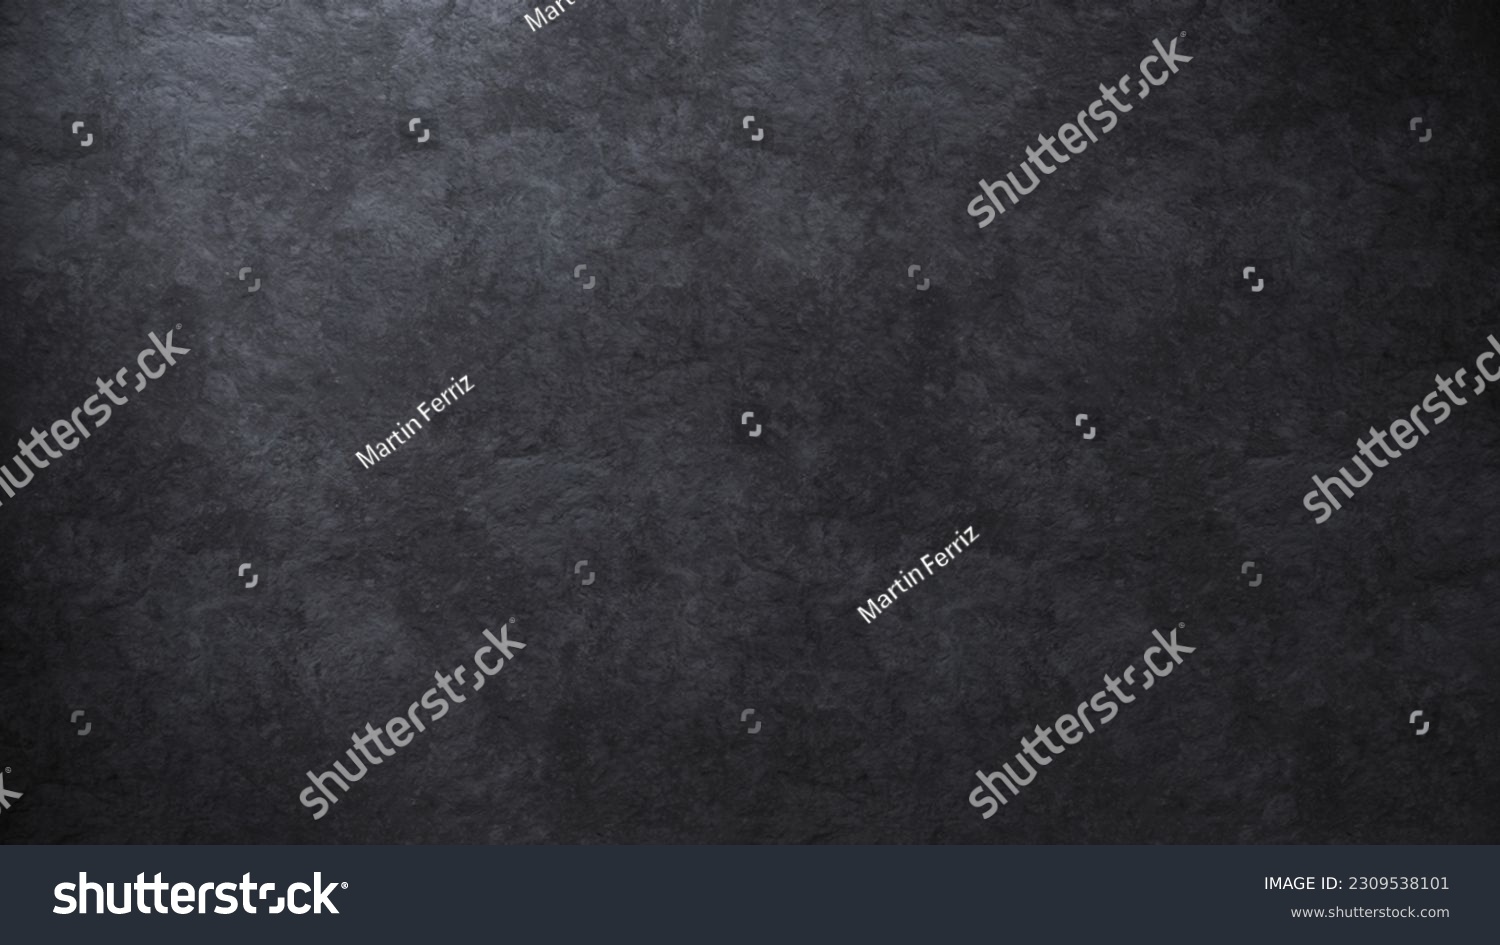 Elegant background texture of a dark stone surface softly lit from one side #2309538101